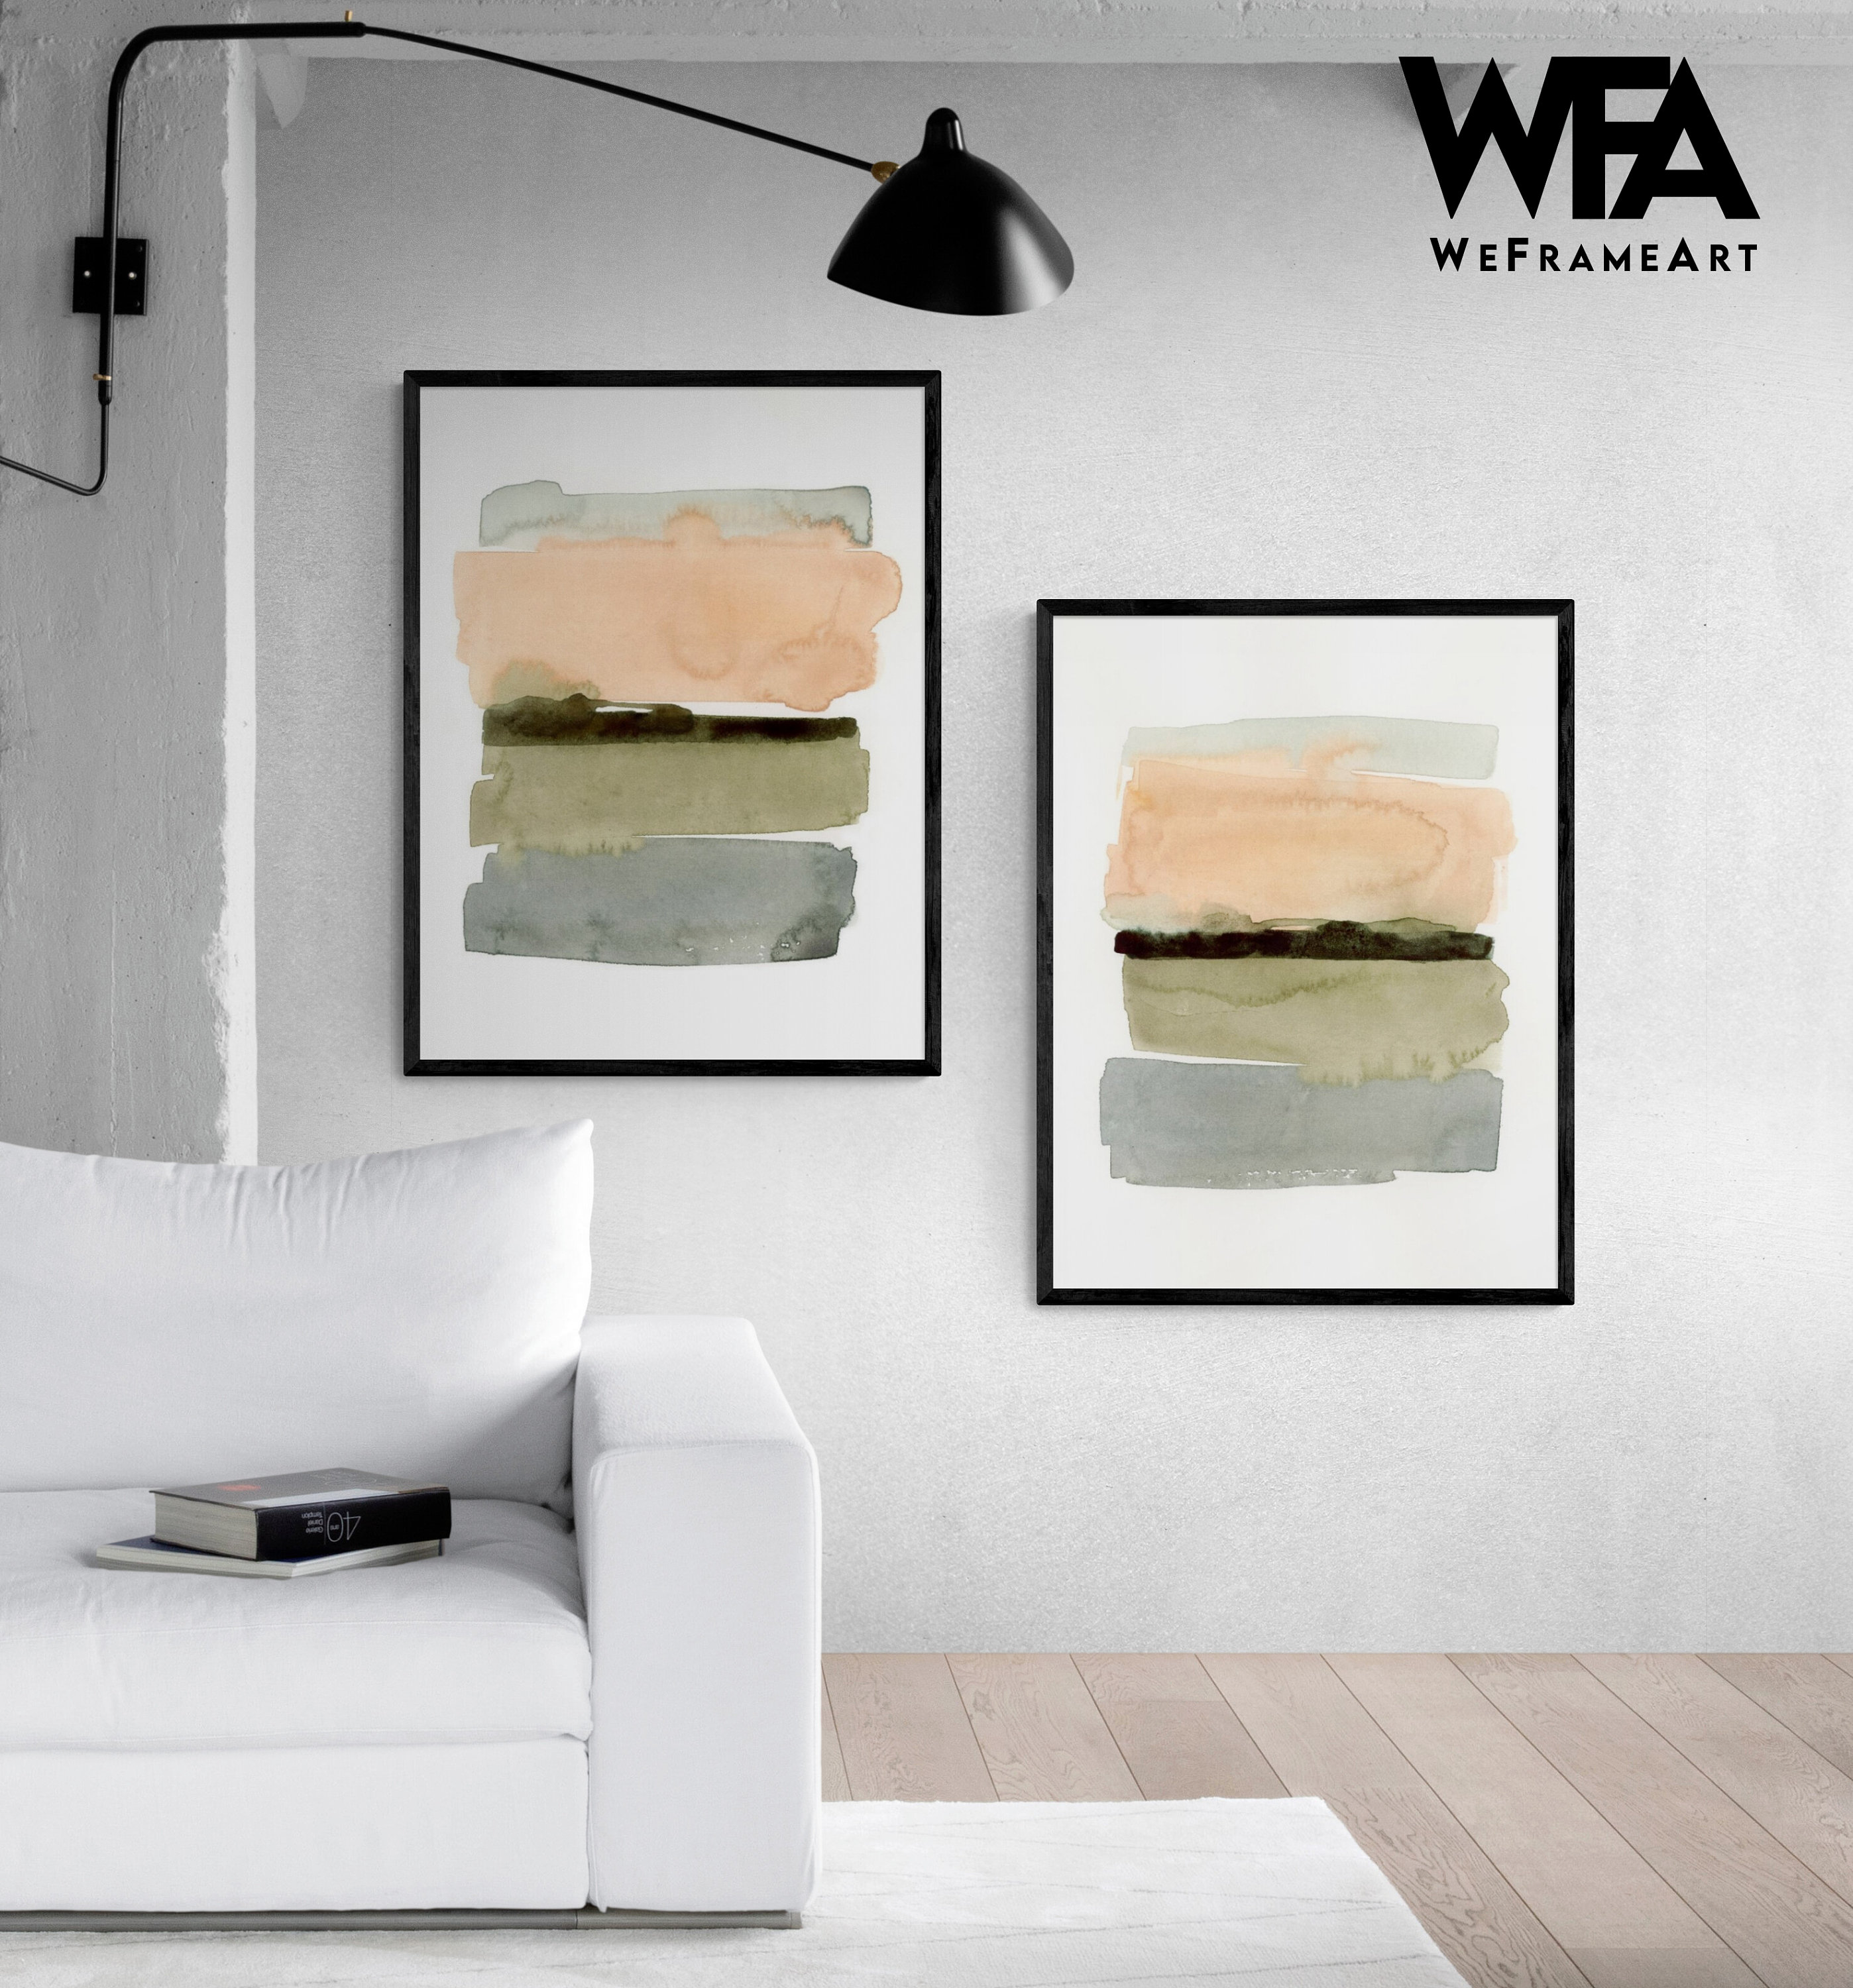 Extra Large Wall Art Set of Two Abstract Paintings 2 Canvas Prints